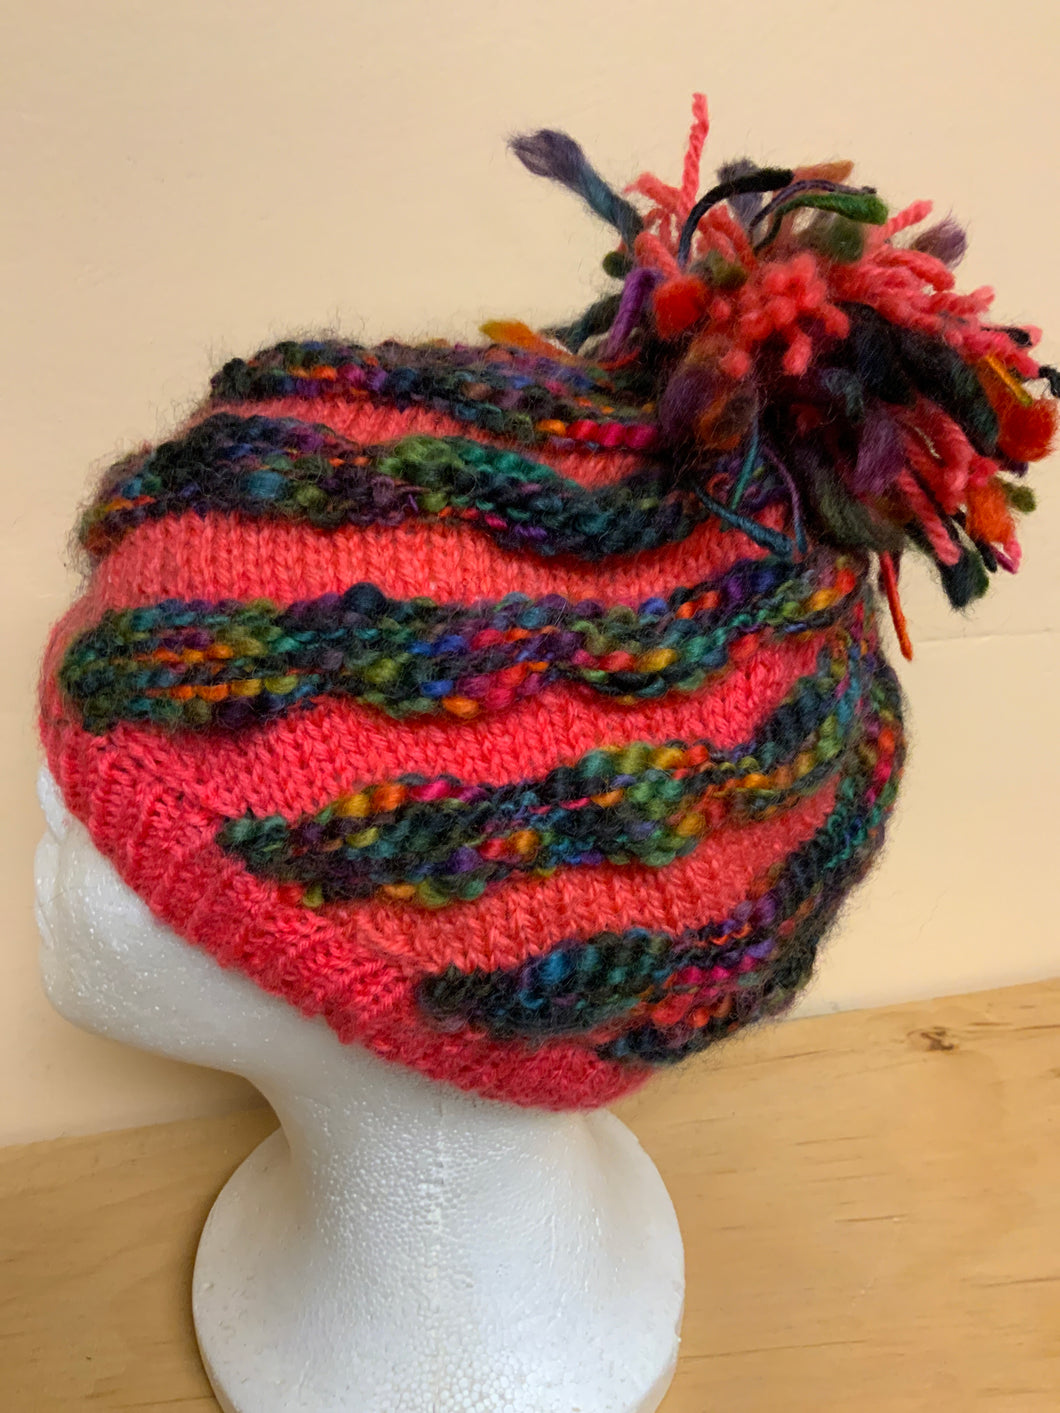 Hand-knit hat, pink with dark knit stripes, and Pom Pom on top